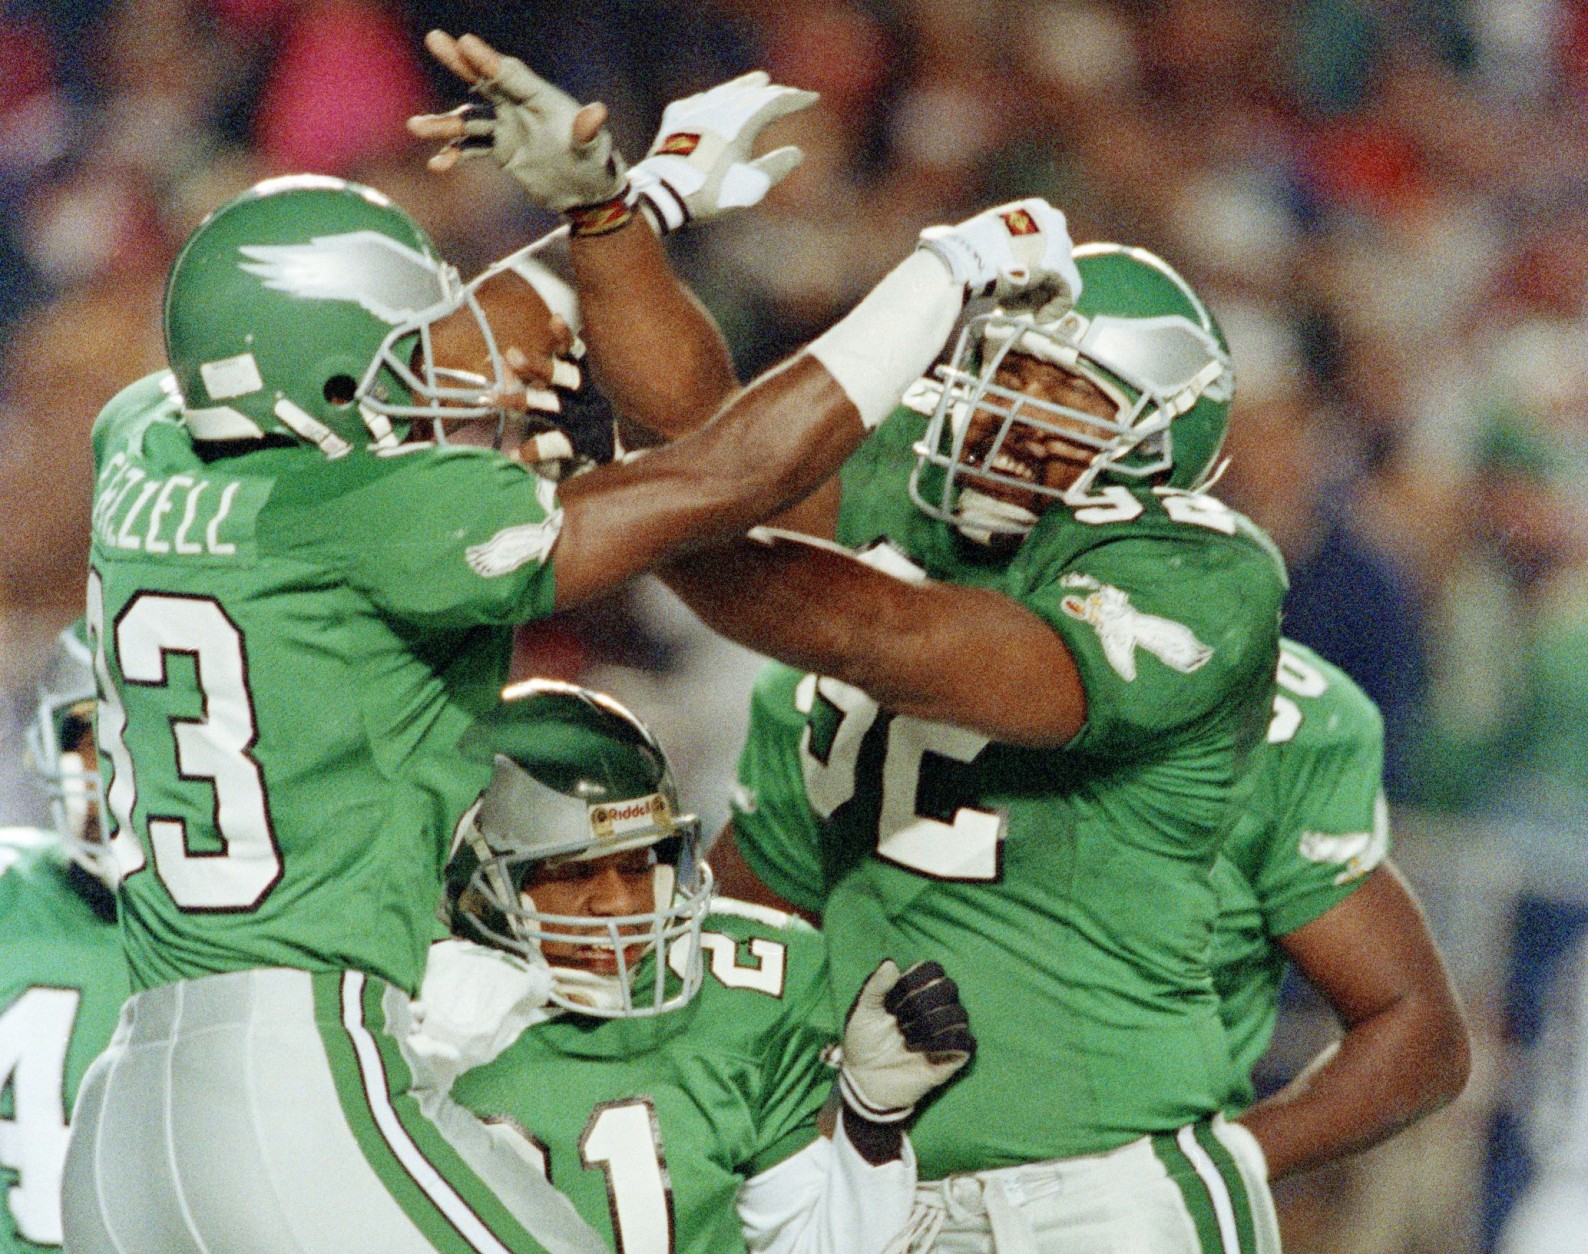 Philadelphia Eagles William Frizzell, left, celebrates his first quarter touchdown after intercepting a pass by Washington Redskins quarterback Jeff Rutledge (not pictured), with teammates Eric Allen, at center, and Reggie White, at right. The action came in the NFL game on Monday, Nov. 12, 1990 at Philadelphia's Veterans Stadium. (AP Photo/Rusty Kennedy)